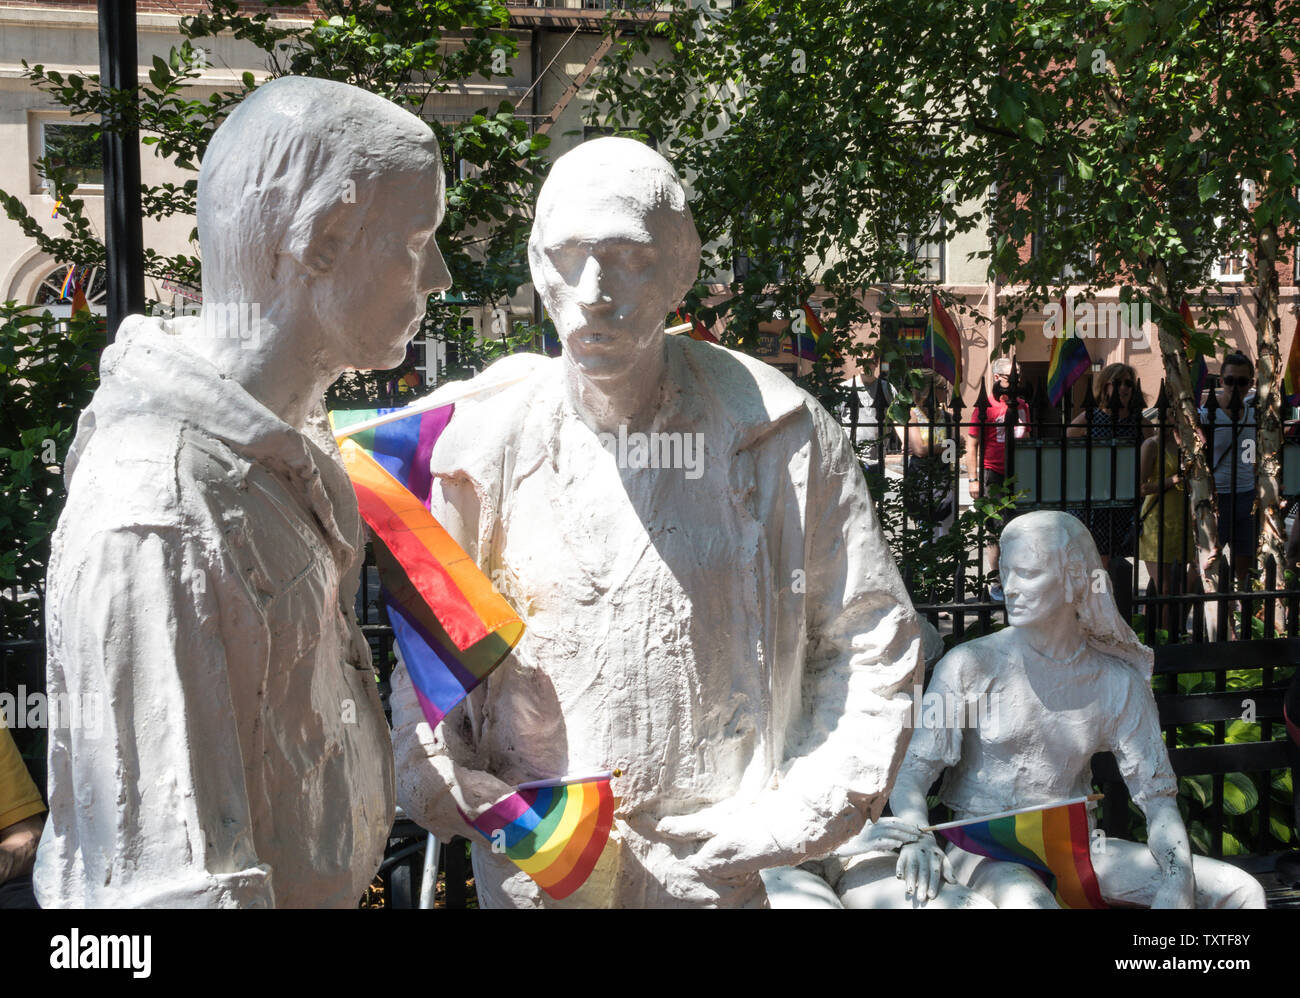 The Stonewall National Monument is located in Greenwich Village, NYC, USA Stock Photo